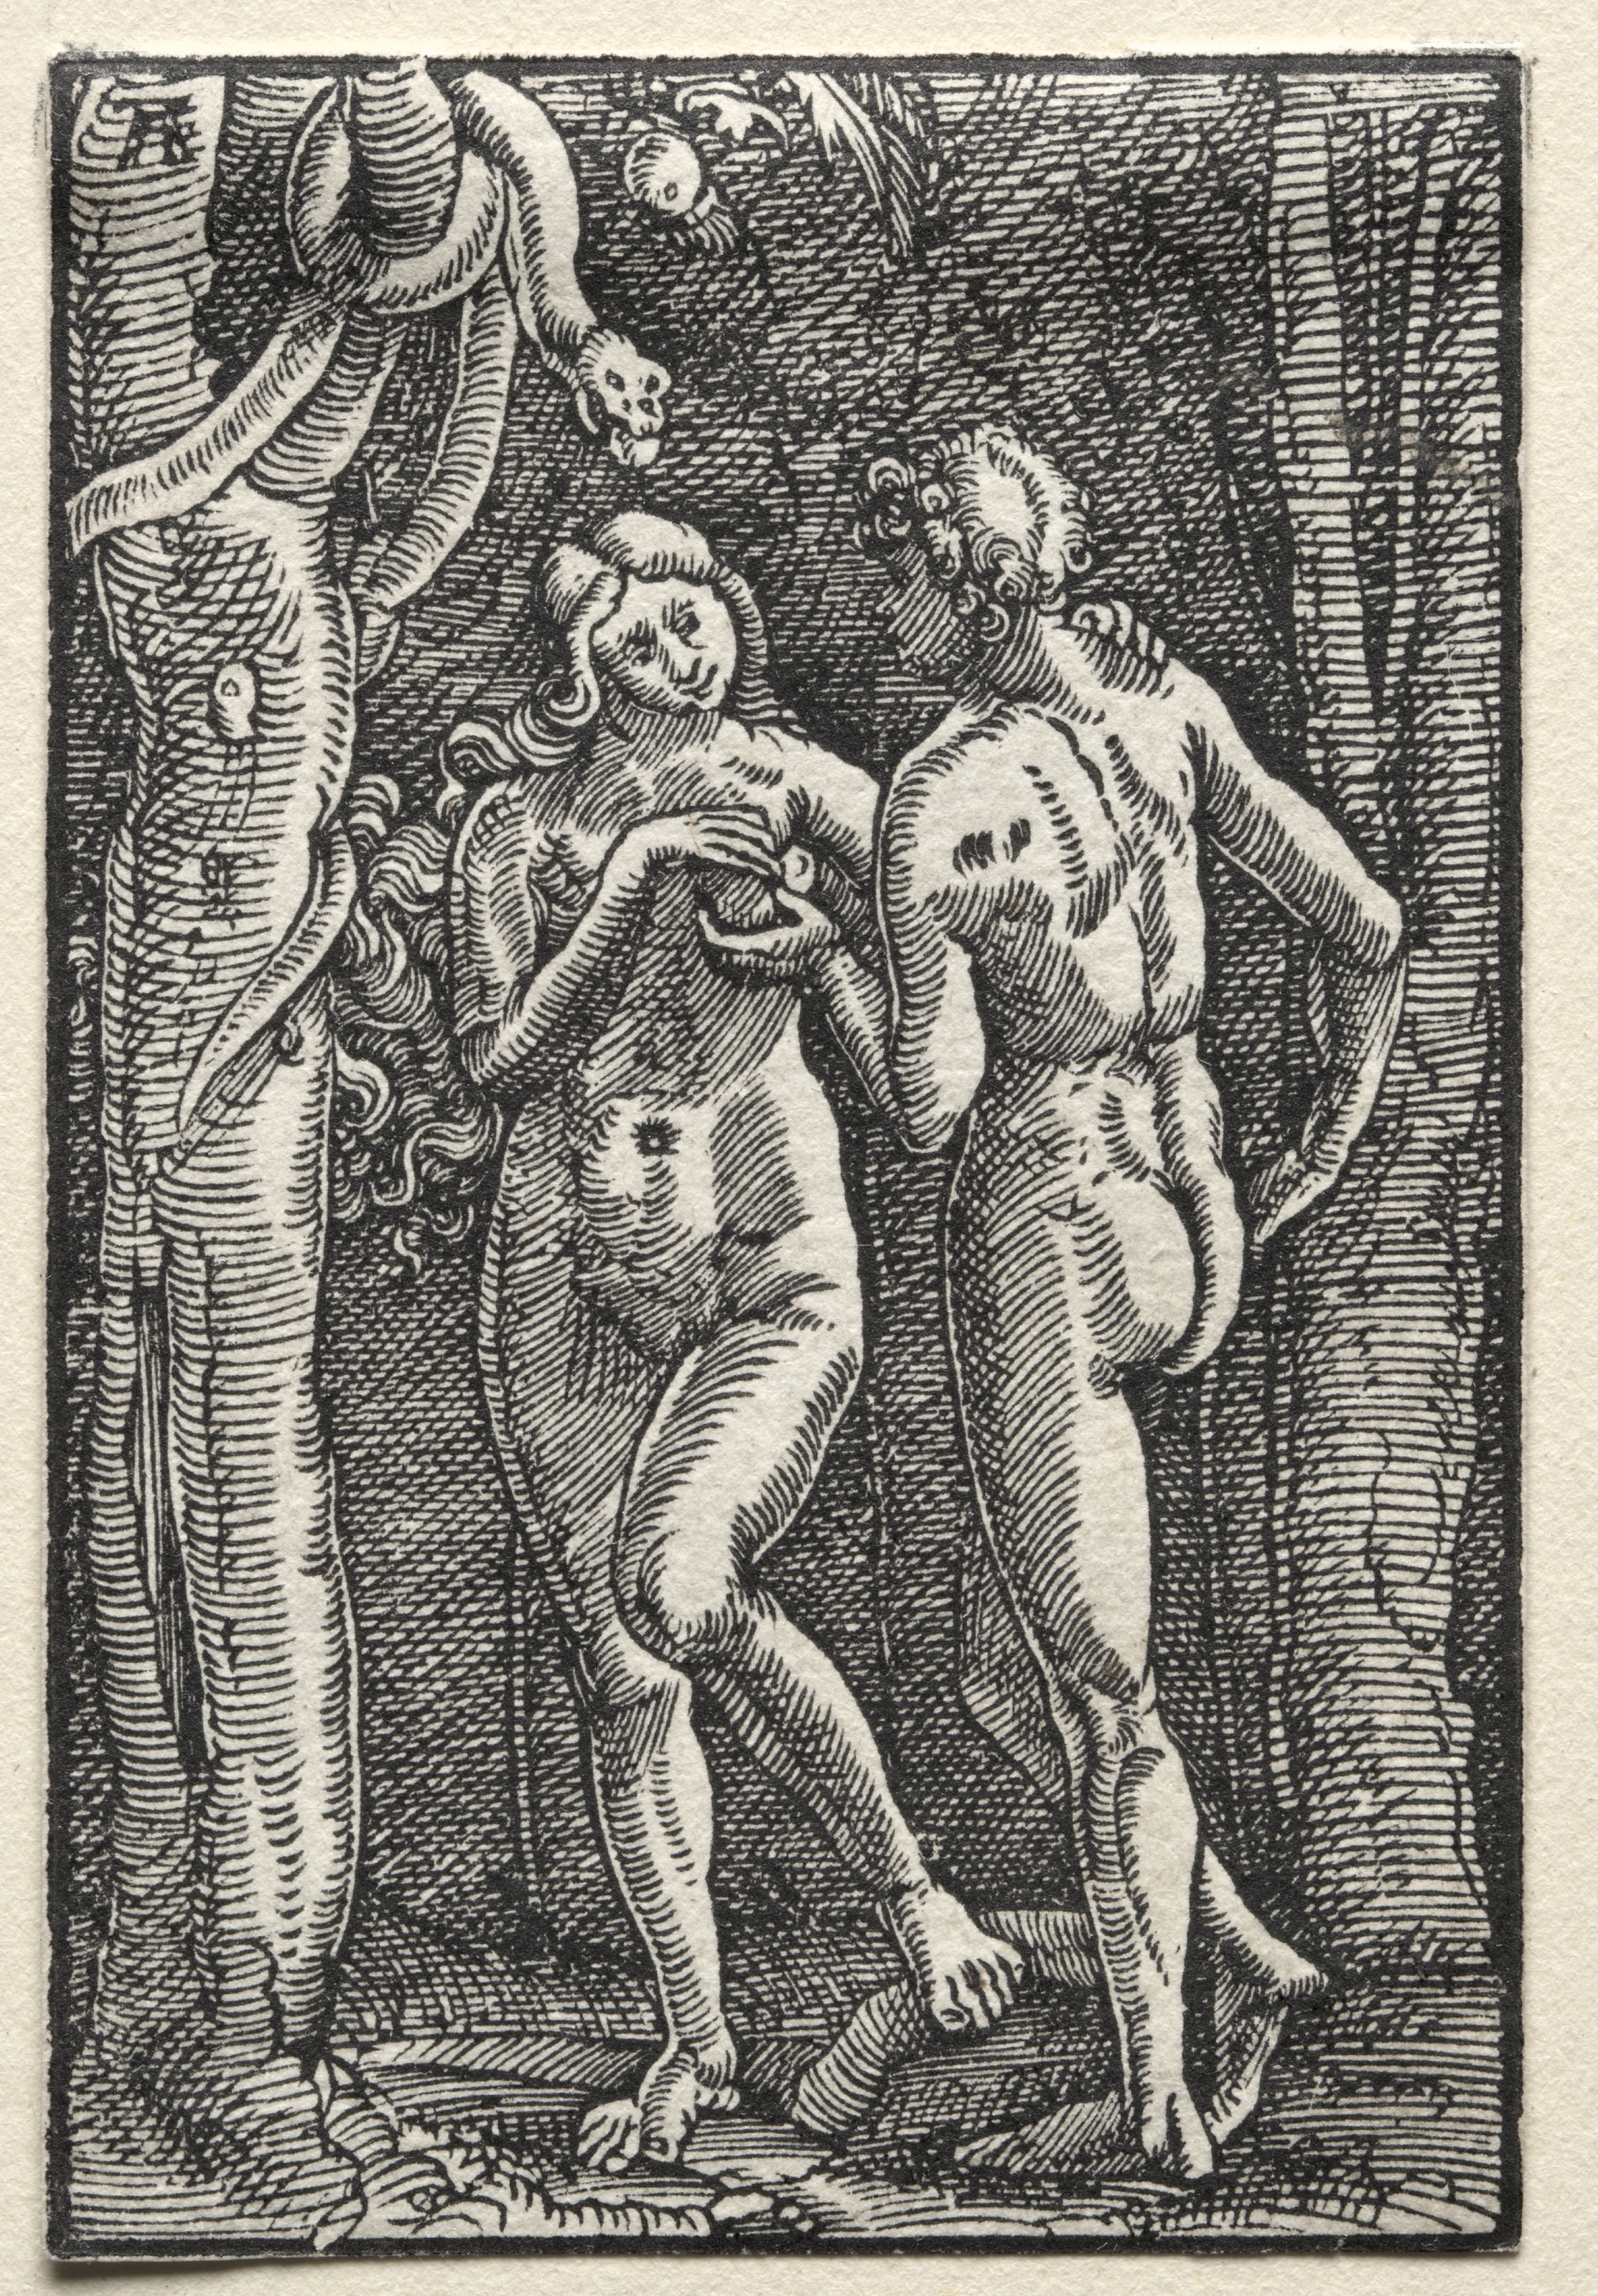 The Fall and Redemption of Man:  Adam and Eve Eating the Forbidden Fruit